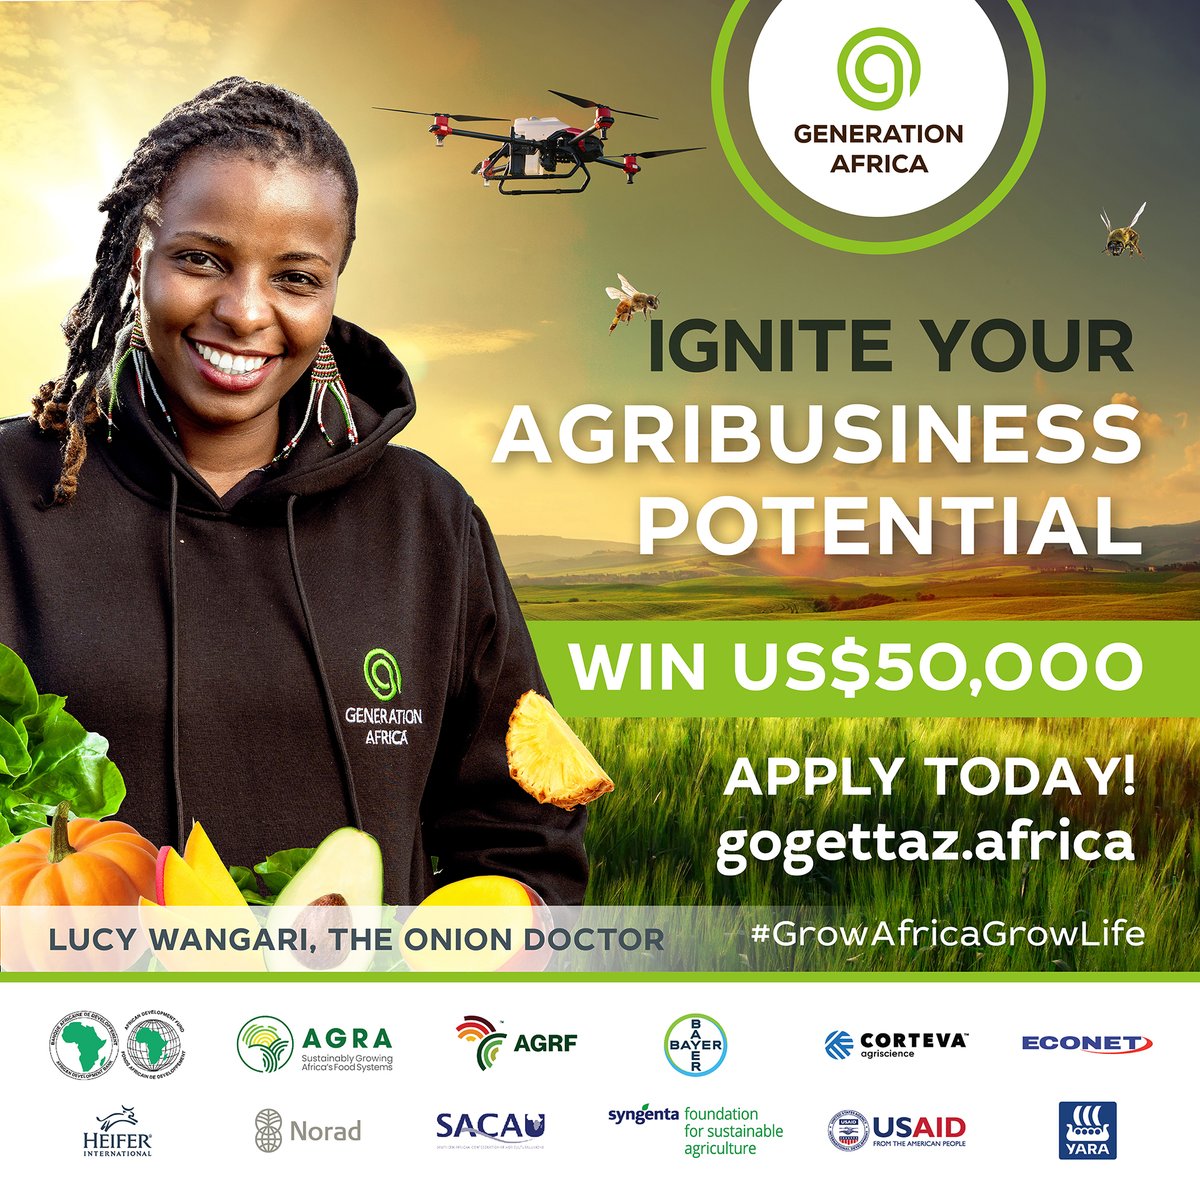 👩‍🌾 Are you an #entrepreneur creating jobs in the #agrifood sector? Then enter the 2023 #GoGettaz Agripreneur Prize Competition to fast-track your journey to scale. 

👉ENTER at gogettaz.africa.
🏁Deadline: 19 June 2023

#GrowAfricaGrowLife

@AGRA_Africa @TheAGRF @yara